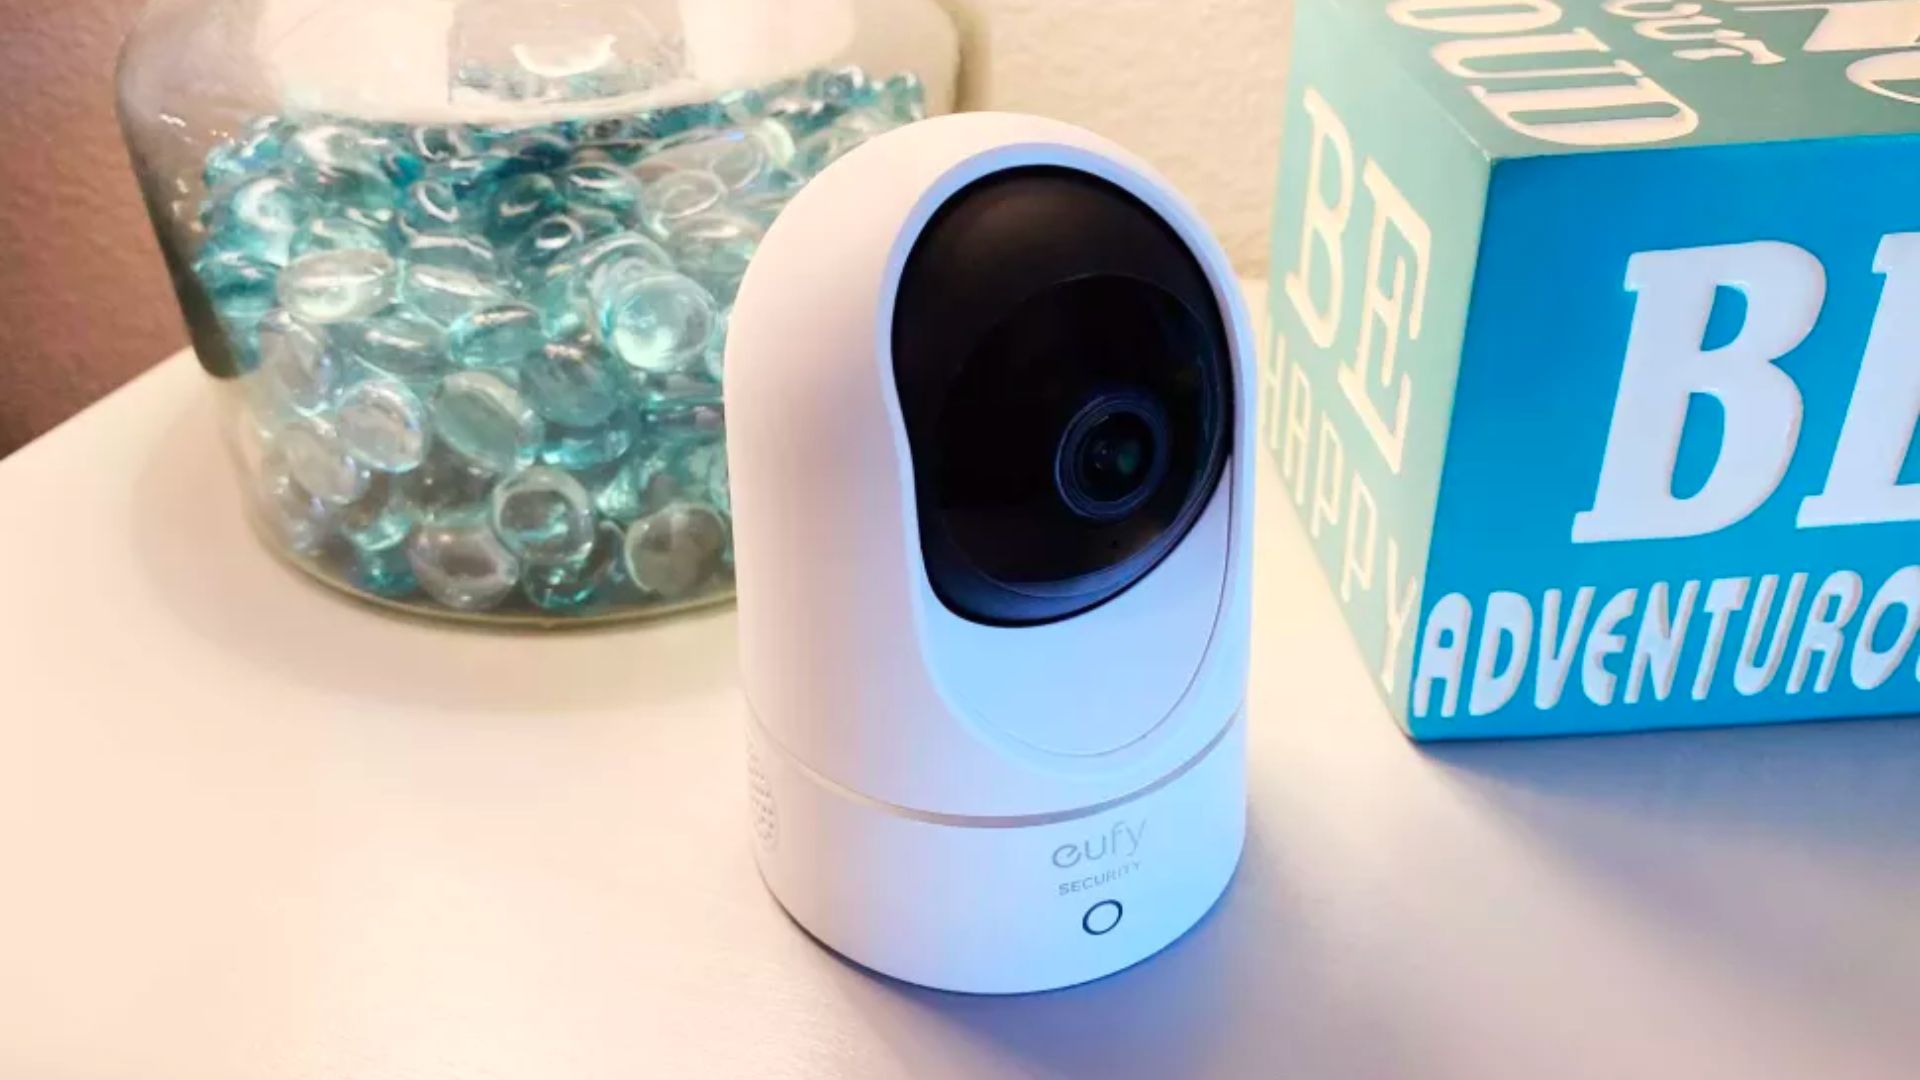 Why Black Friday will be a great time for me to buy a baby HomeKit camera